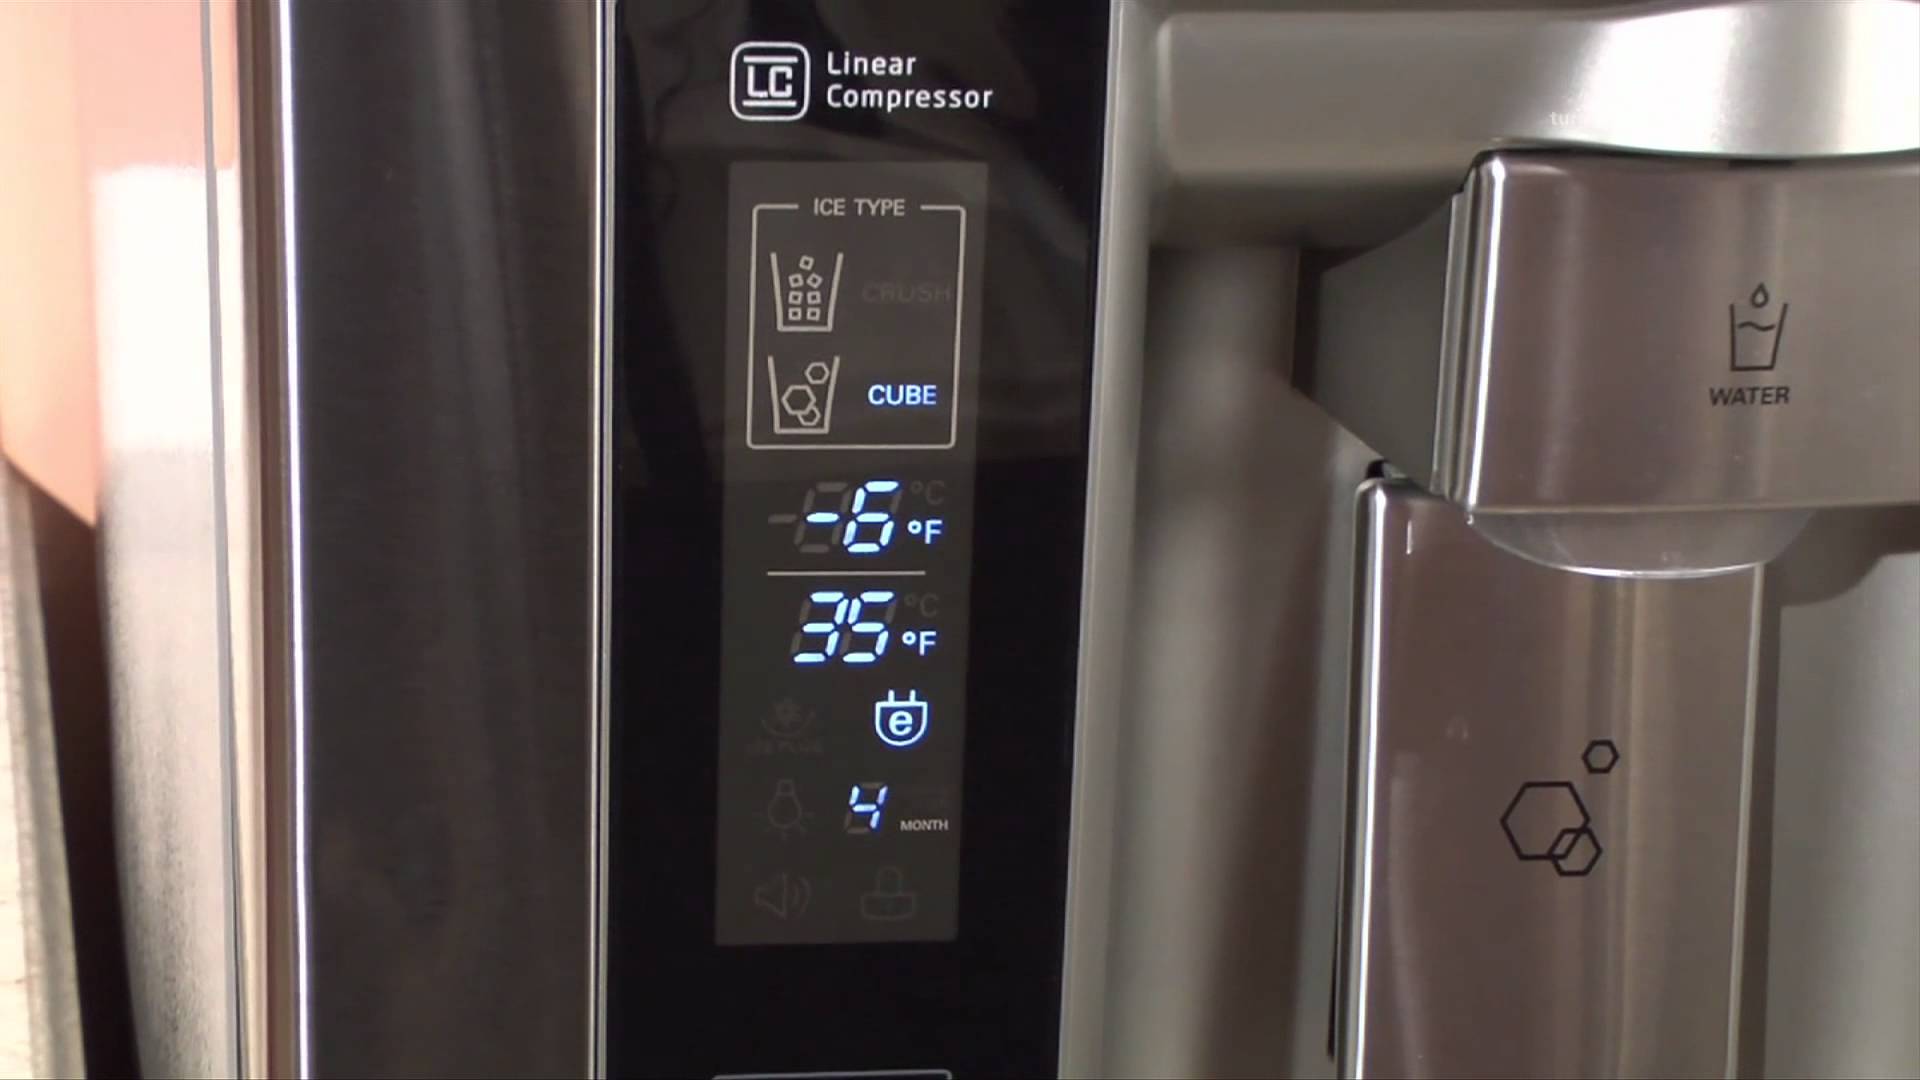 How To Control Lg Refrigerator Temperature Cheap >what is the correct temperature for a lg fridge big sale - OFF 78%